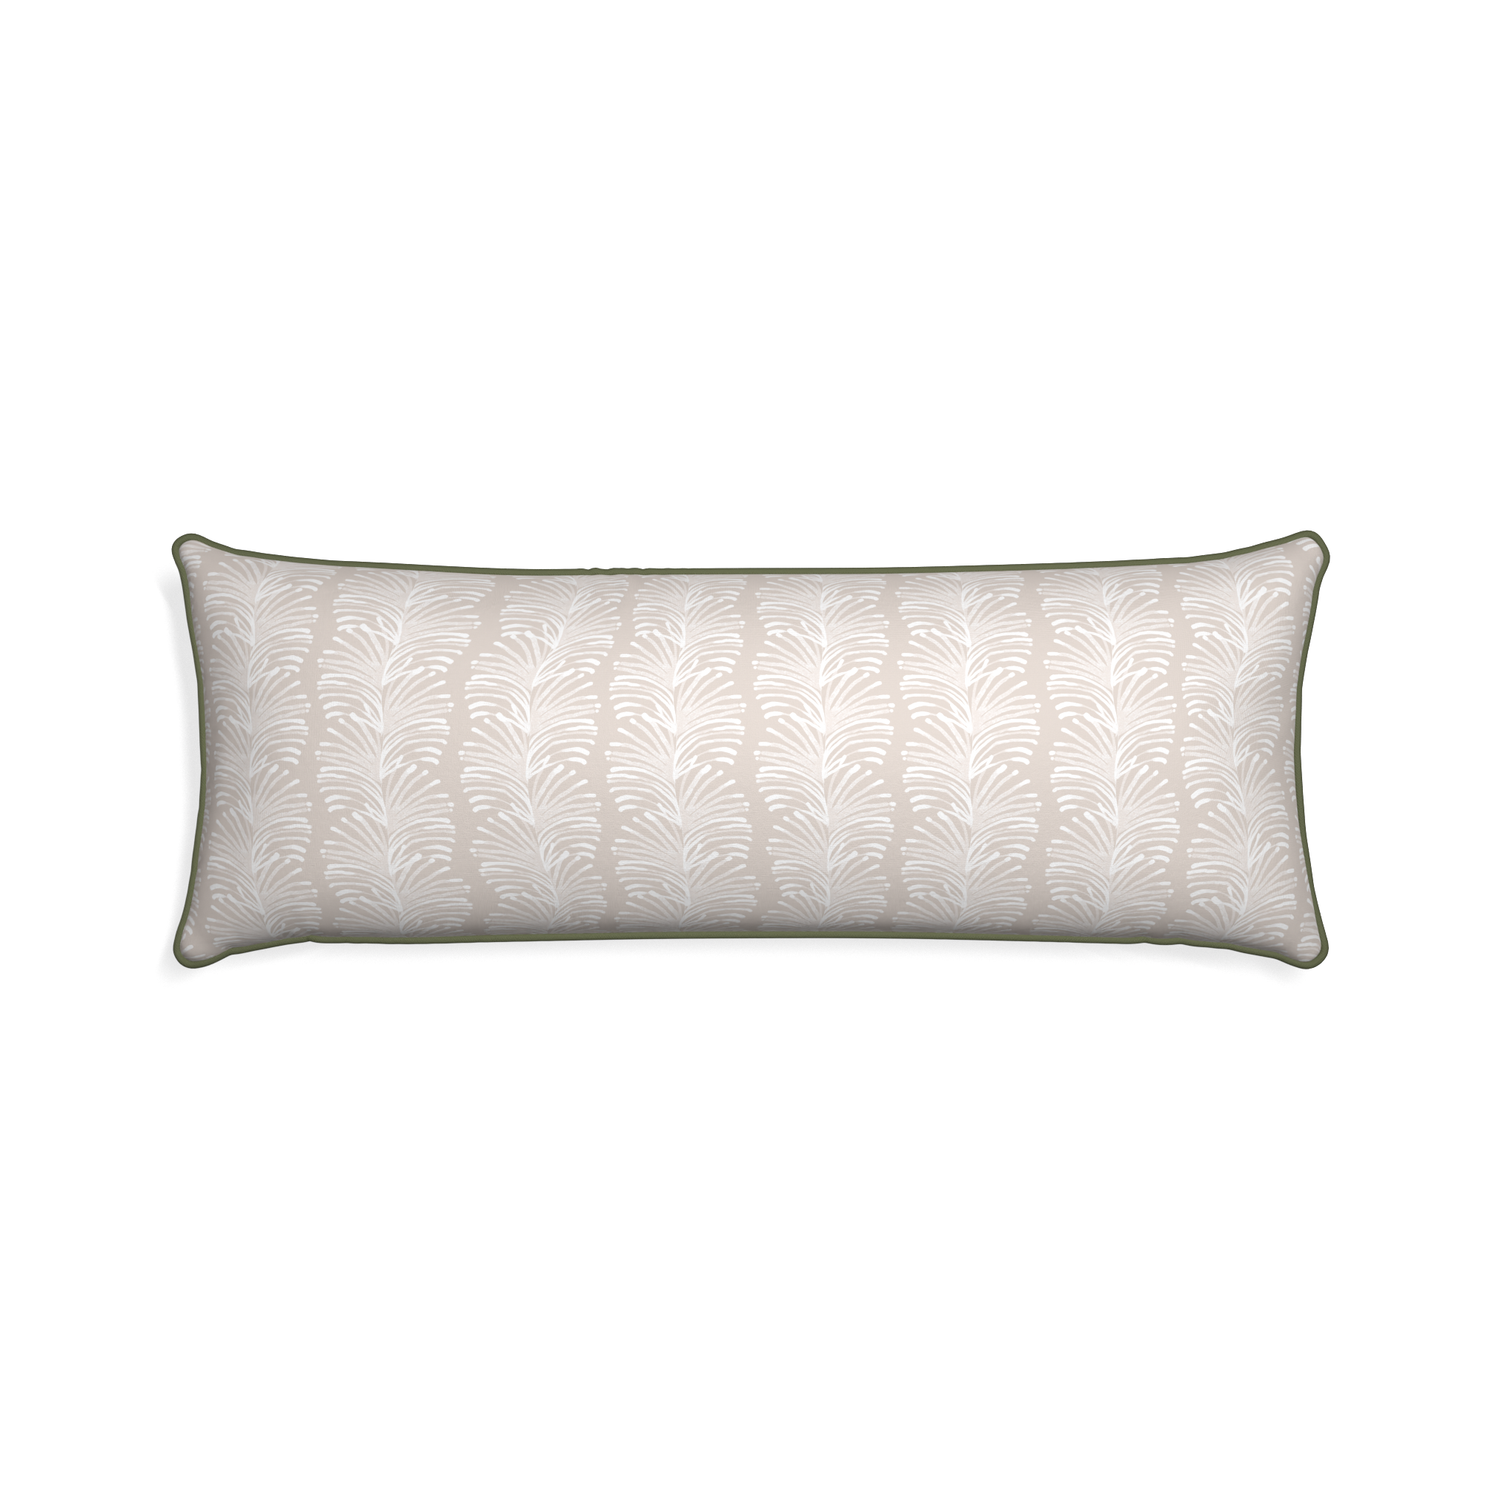 Xl-lumbar emma sand custom sand colored botanical stripepillow with f piping on white background